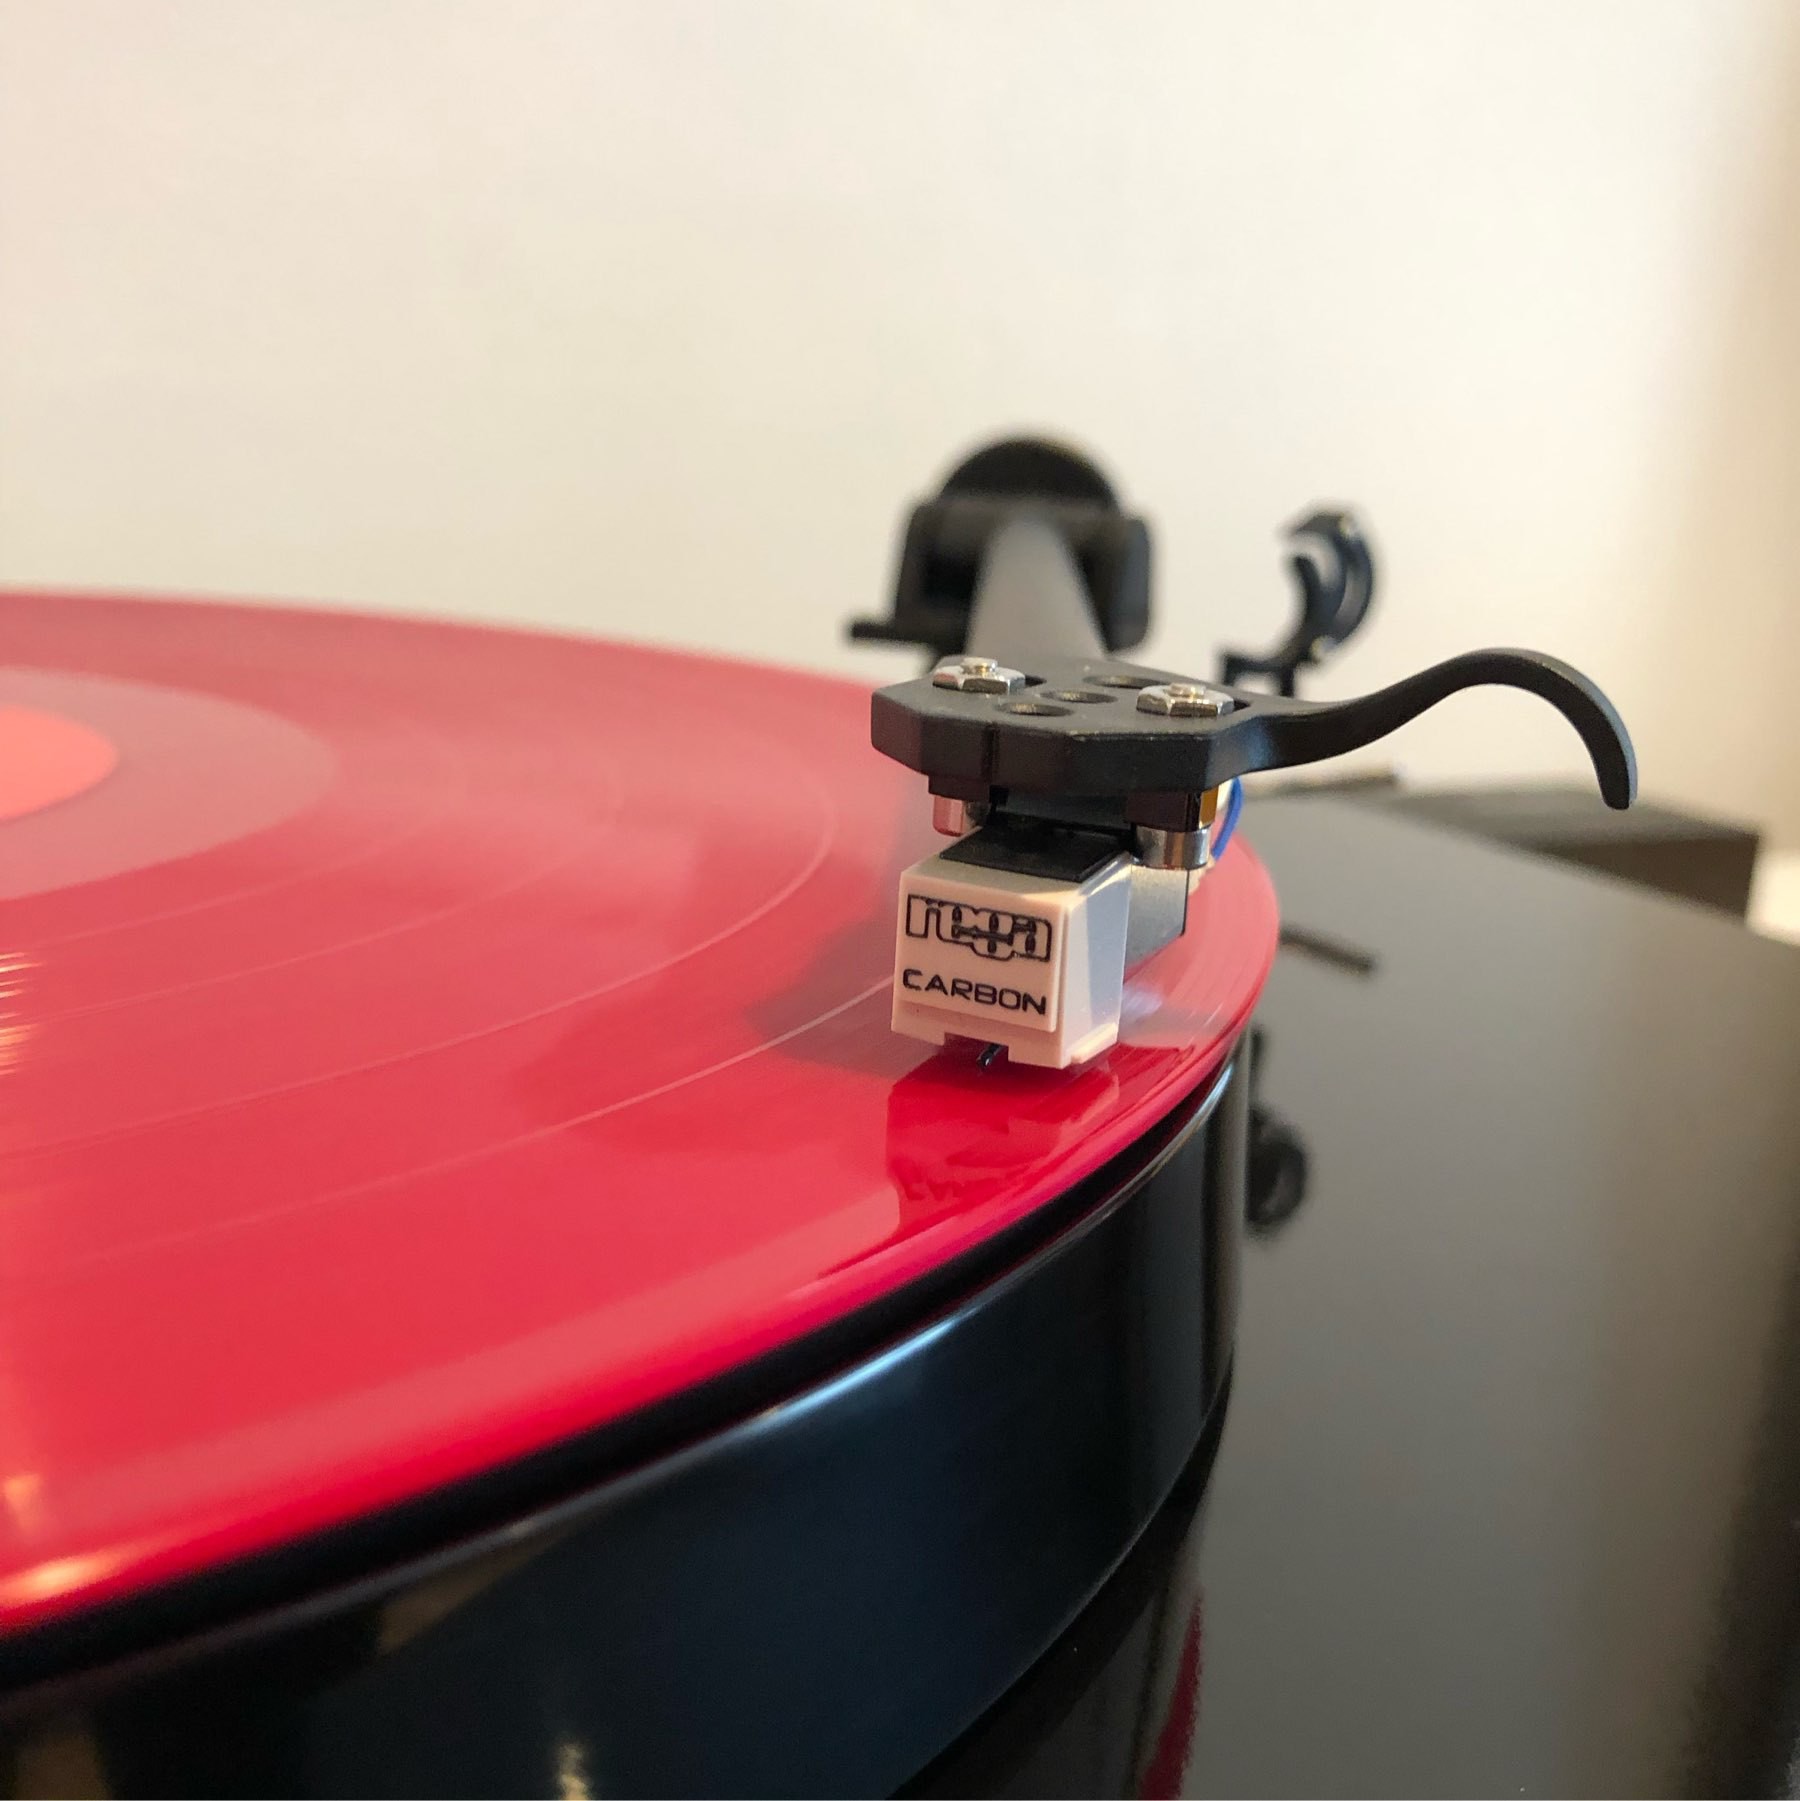 Rega Carbon needle on a pink record playing.